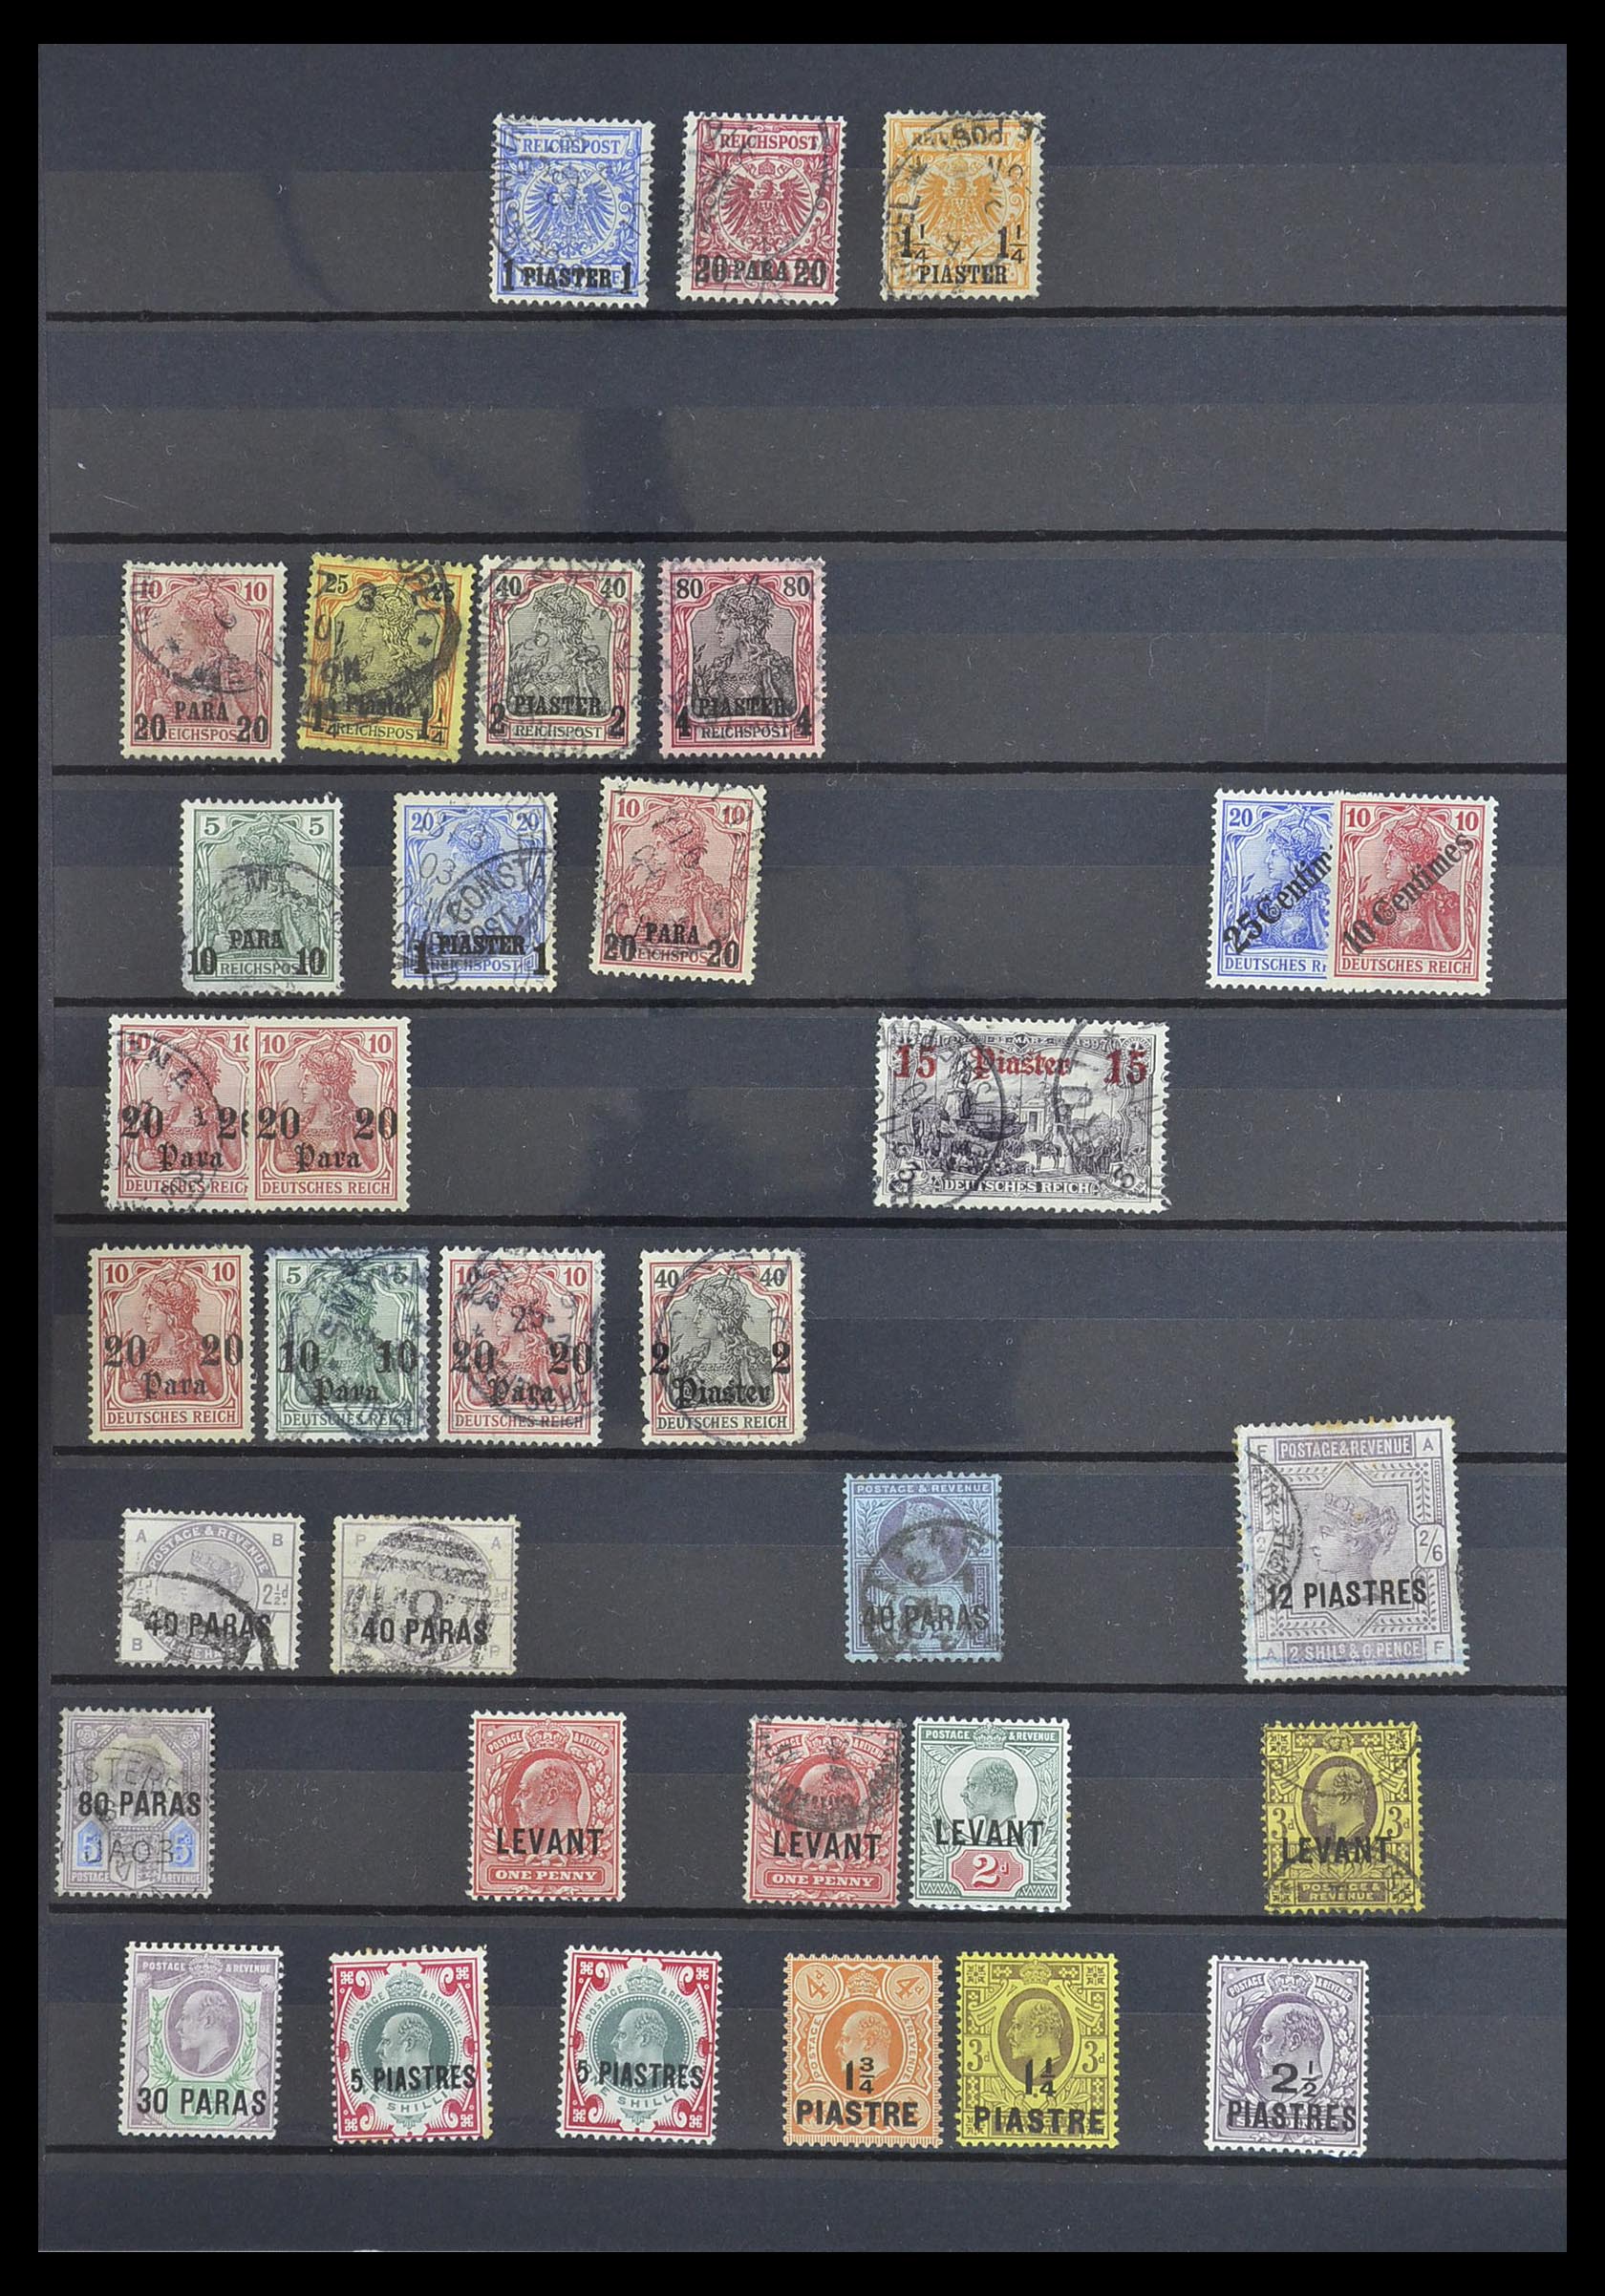 33756 030 - Stamp collection 33756 World classic 1850-1930.